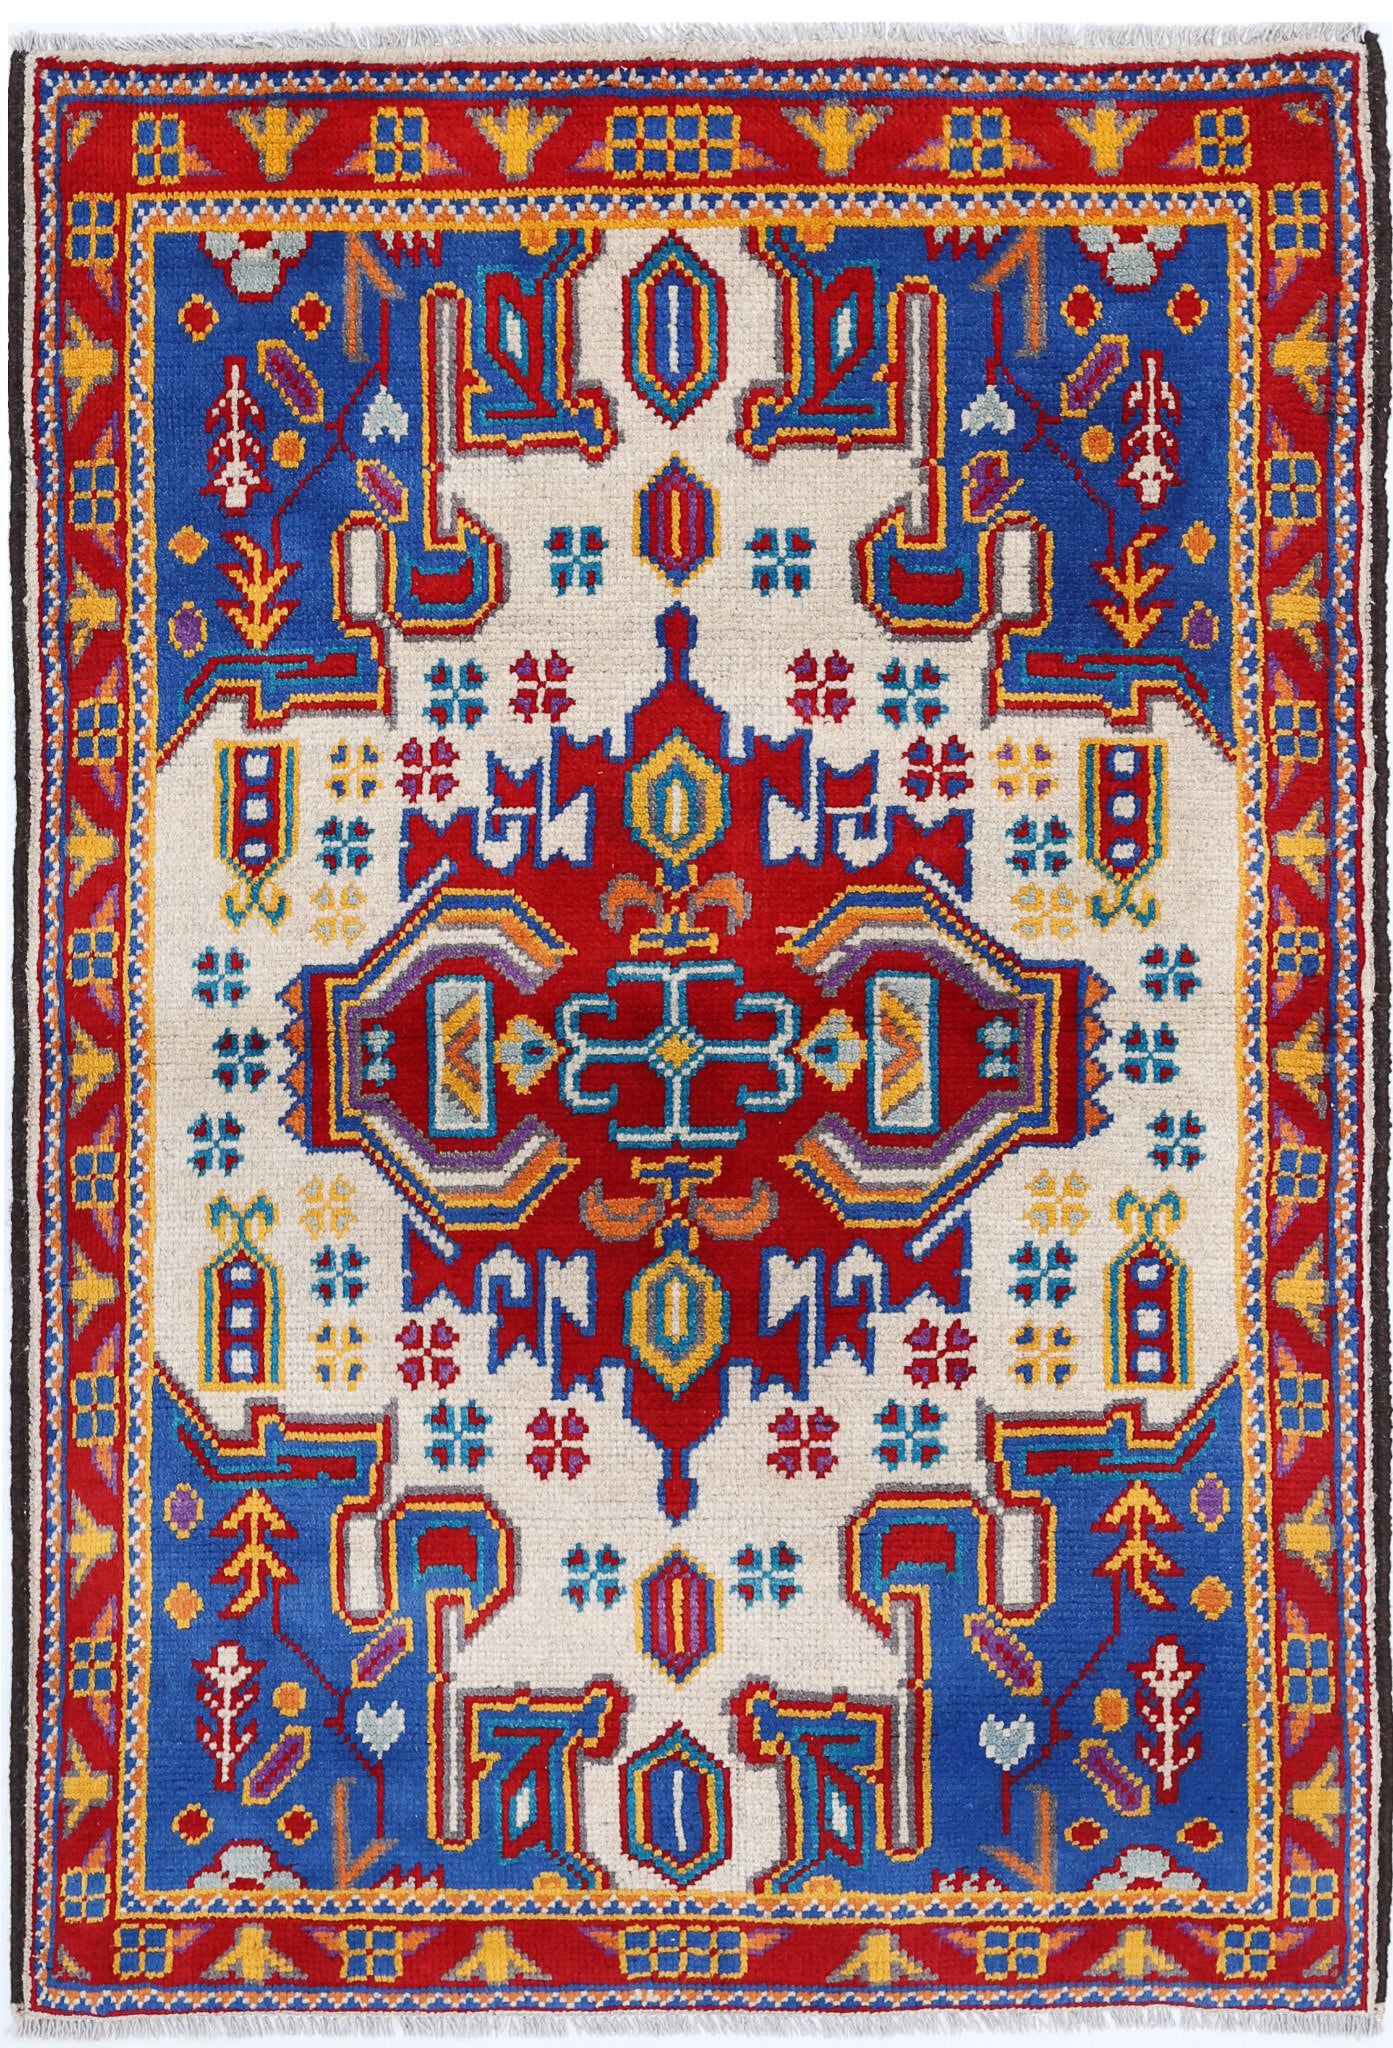 Revival-hand-knotted-qarghani-wool-rug-5014197.jpg